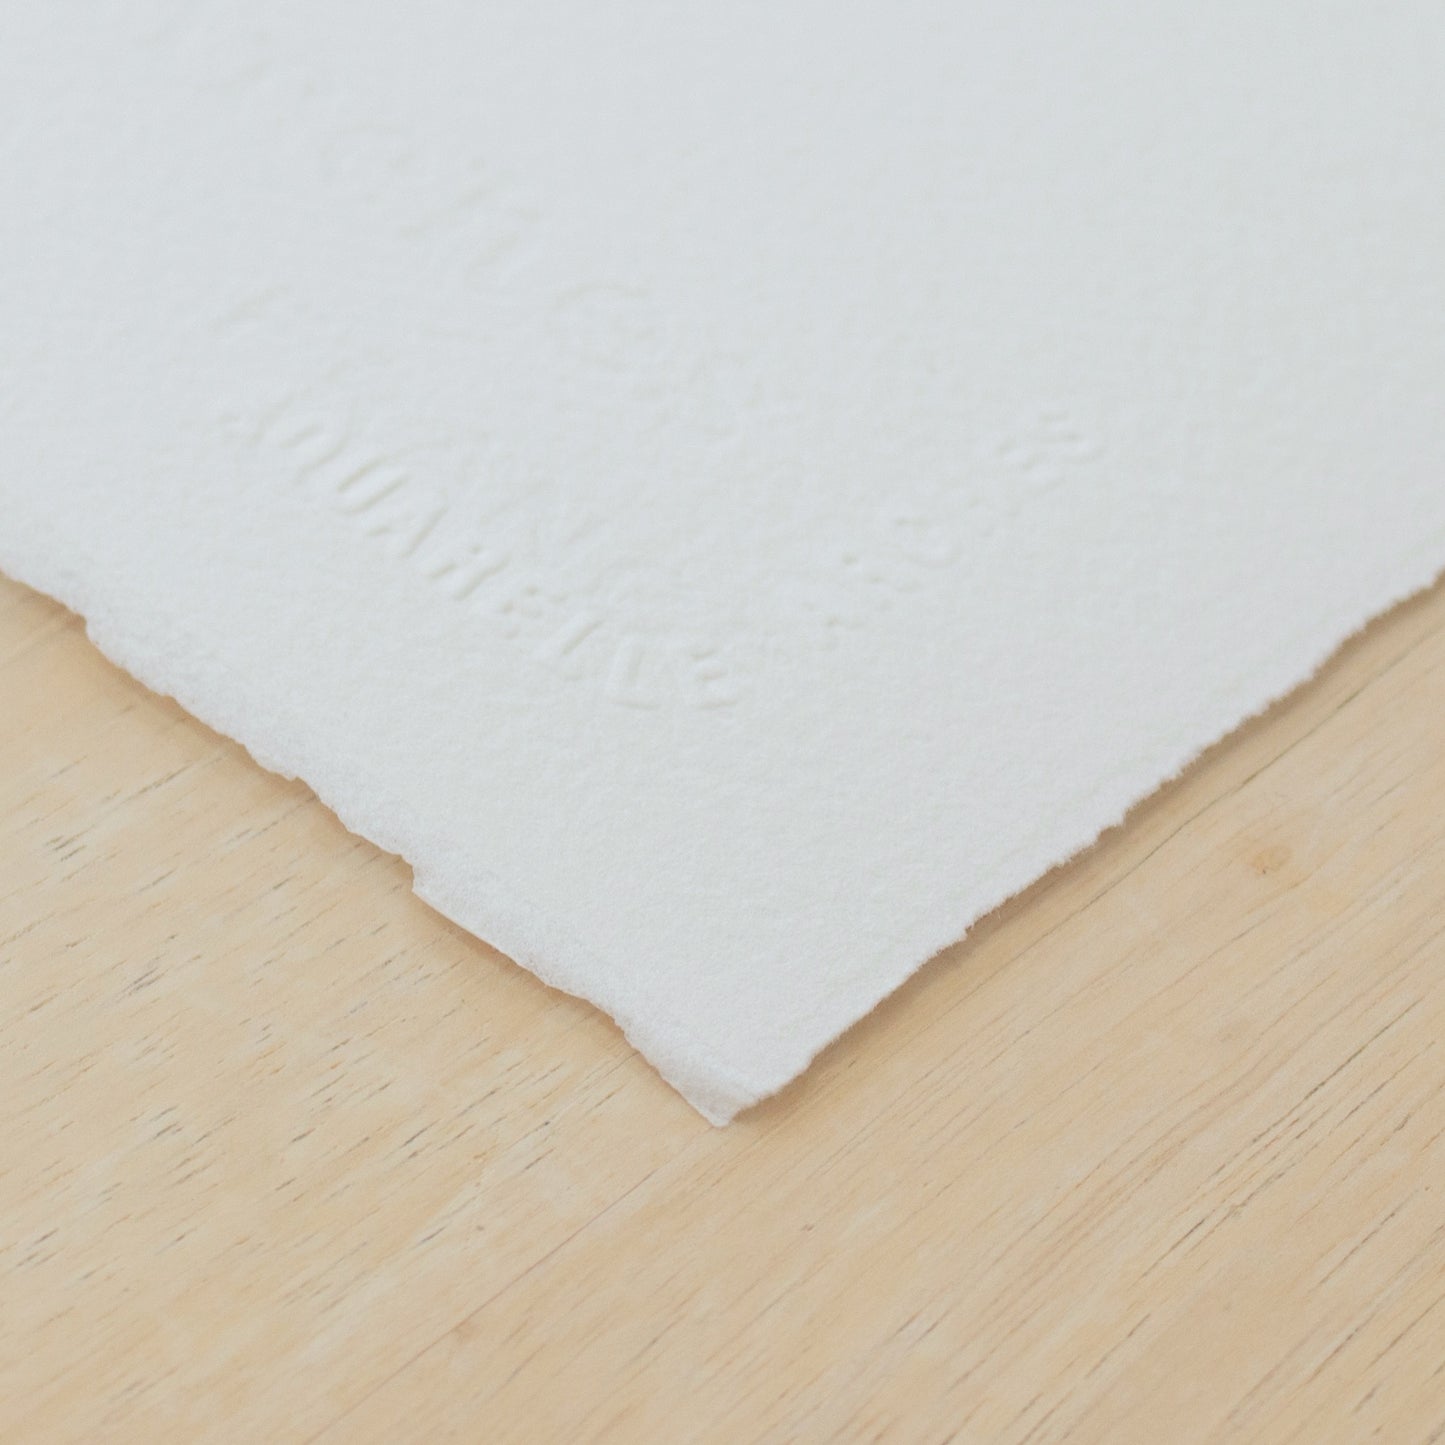 Arches Aquarelle cold pressed watercolour paper with a deckled edge and embossed logo. 